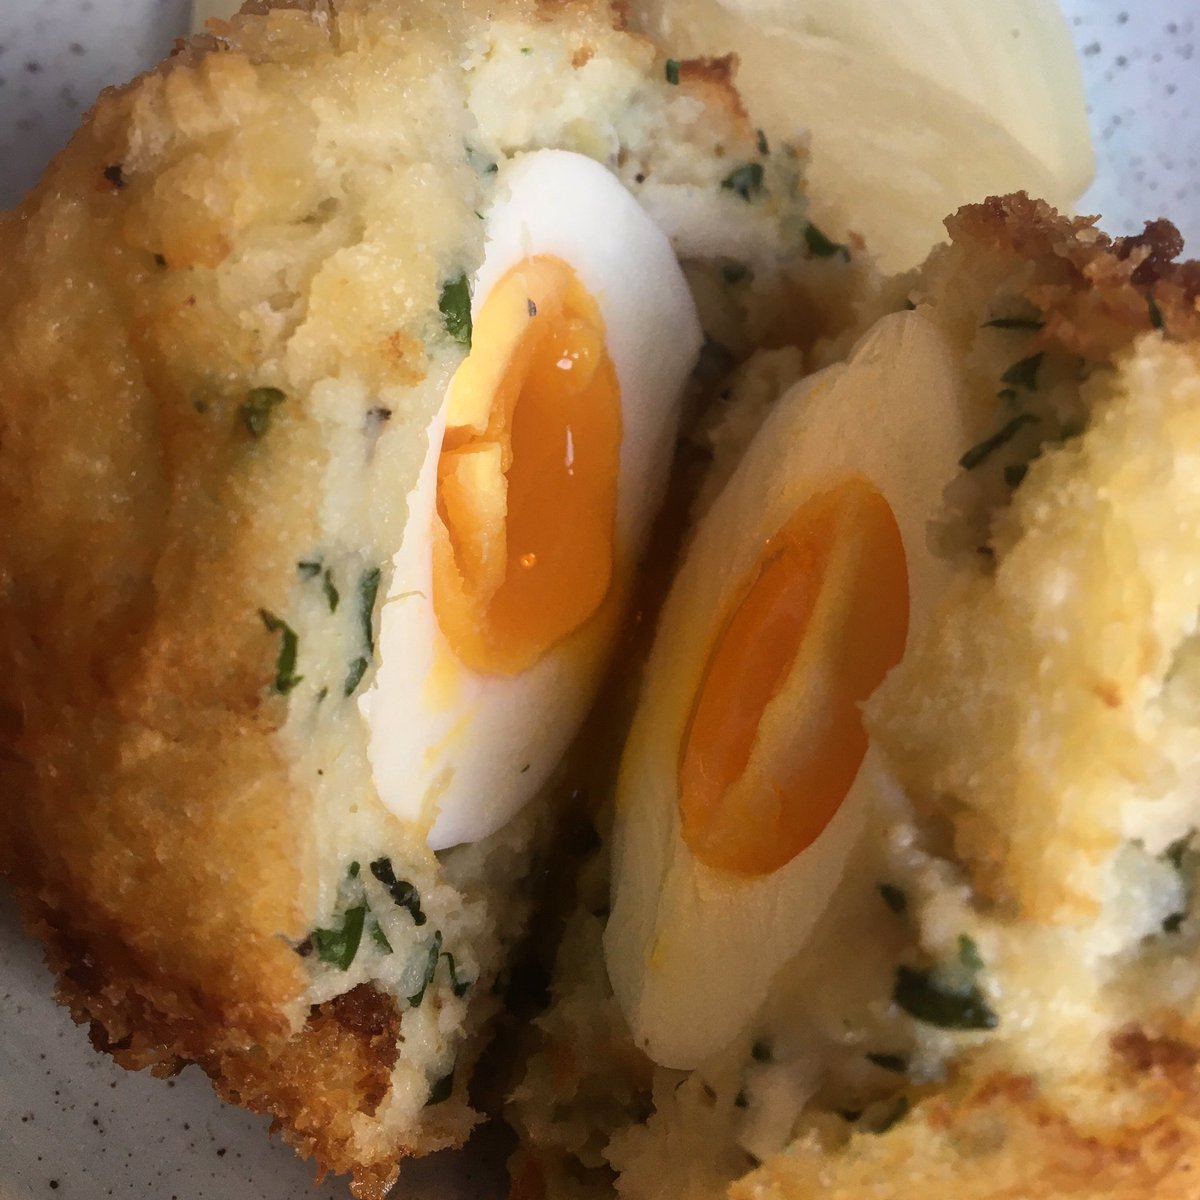 The Crown On Twitter Afternoon Snack With Your Pint We Recommend Our Smoked Haddock Scotch Egg Delicious Snack Pub Treats Food Foodie Eastlondon Https T Co 7at5slizca